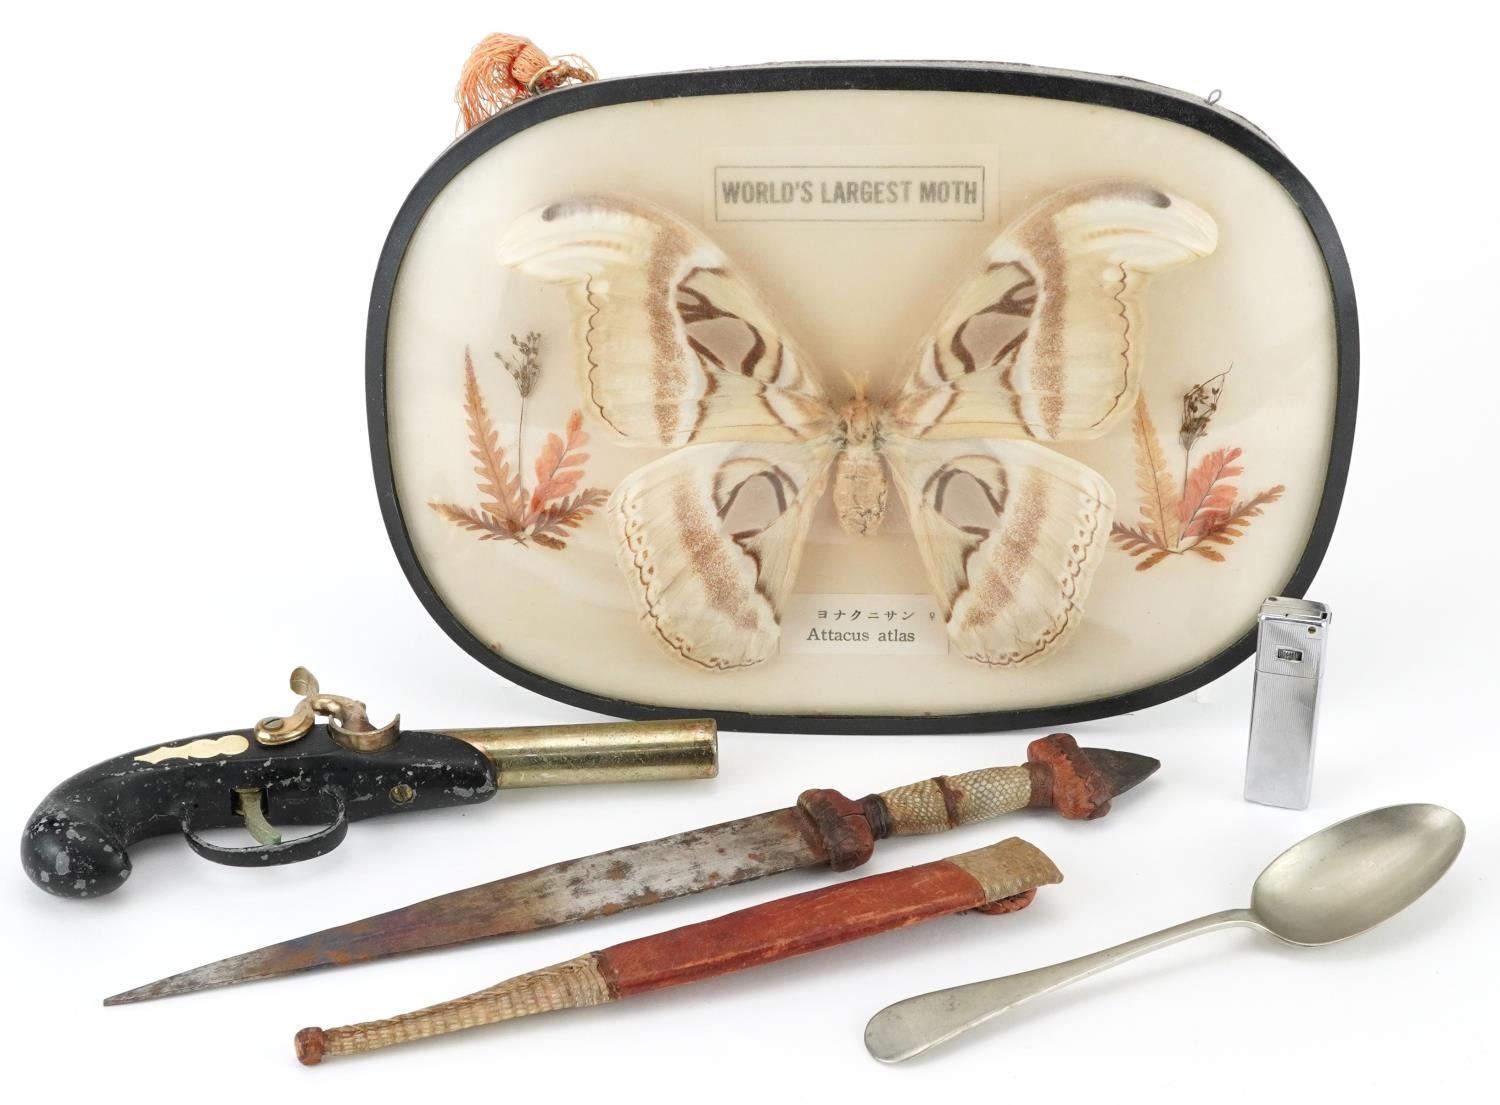 Sundry items including a taxidermy interest Attacus Atlas moth, Sudanese knife and a lighter in